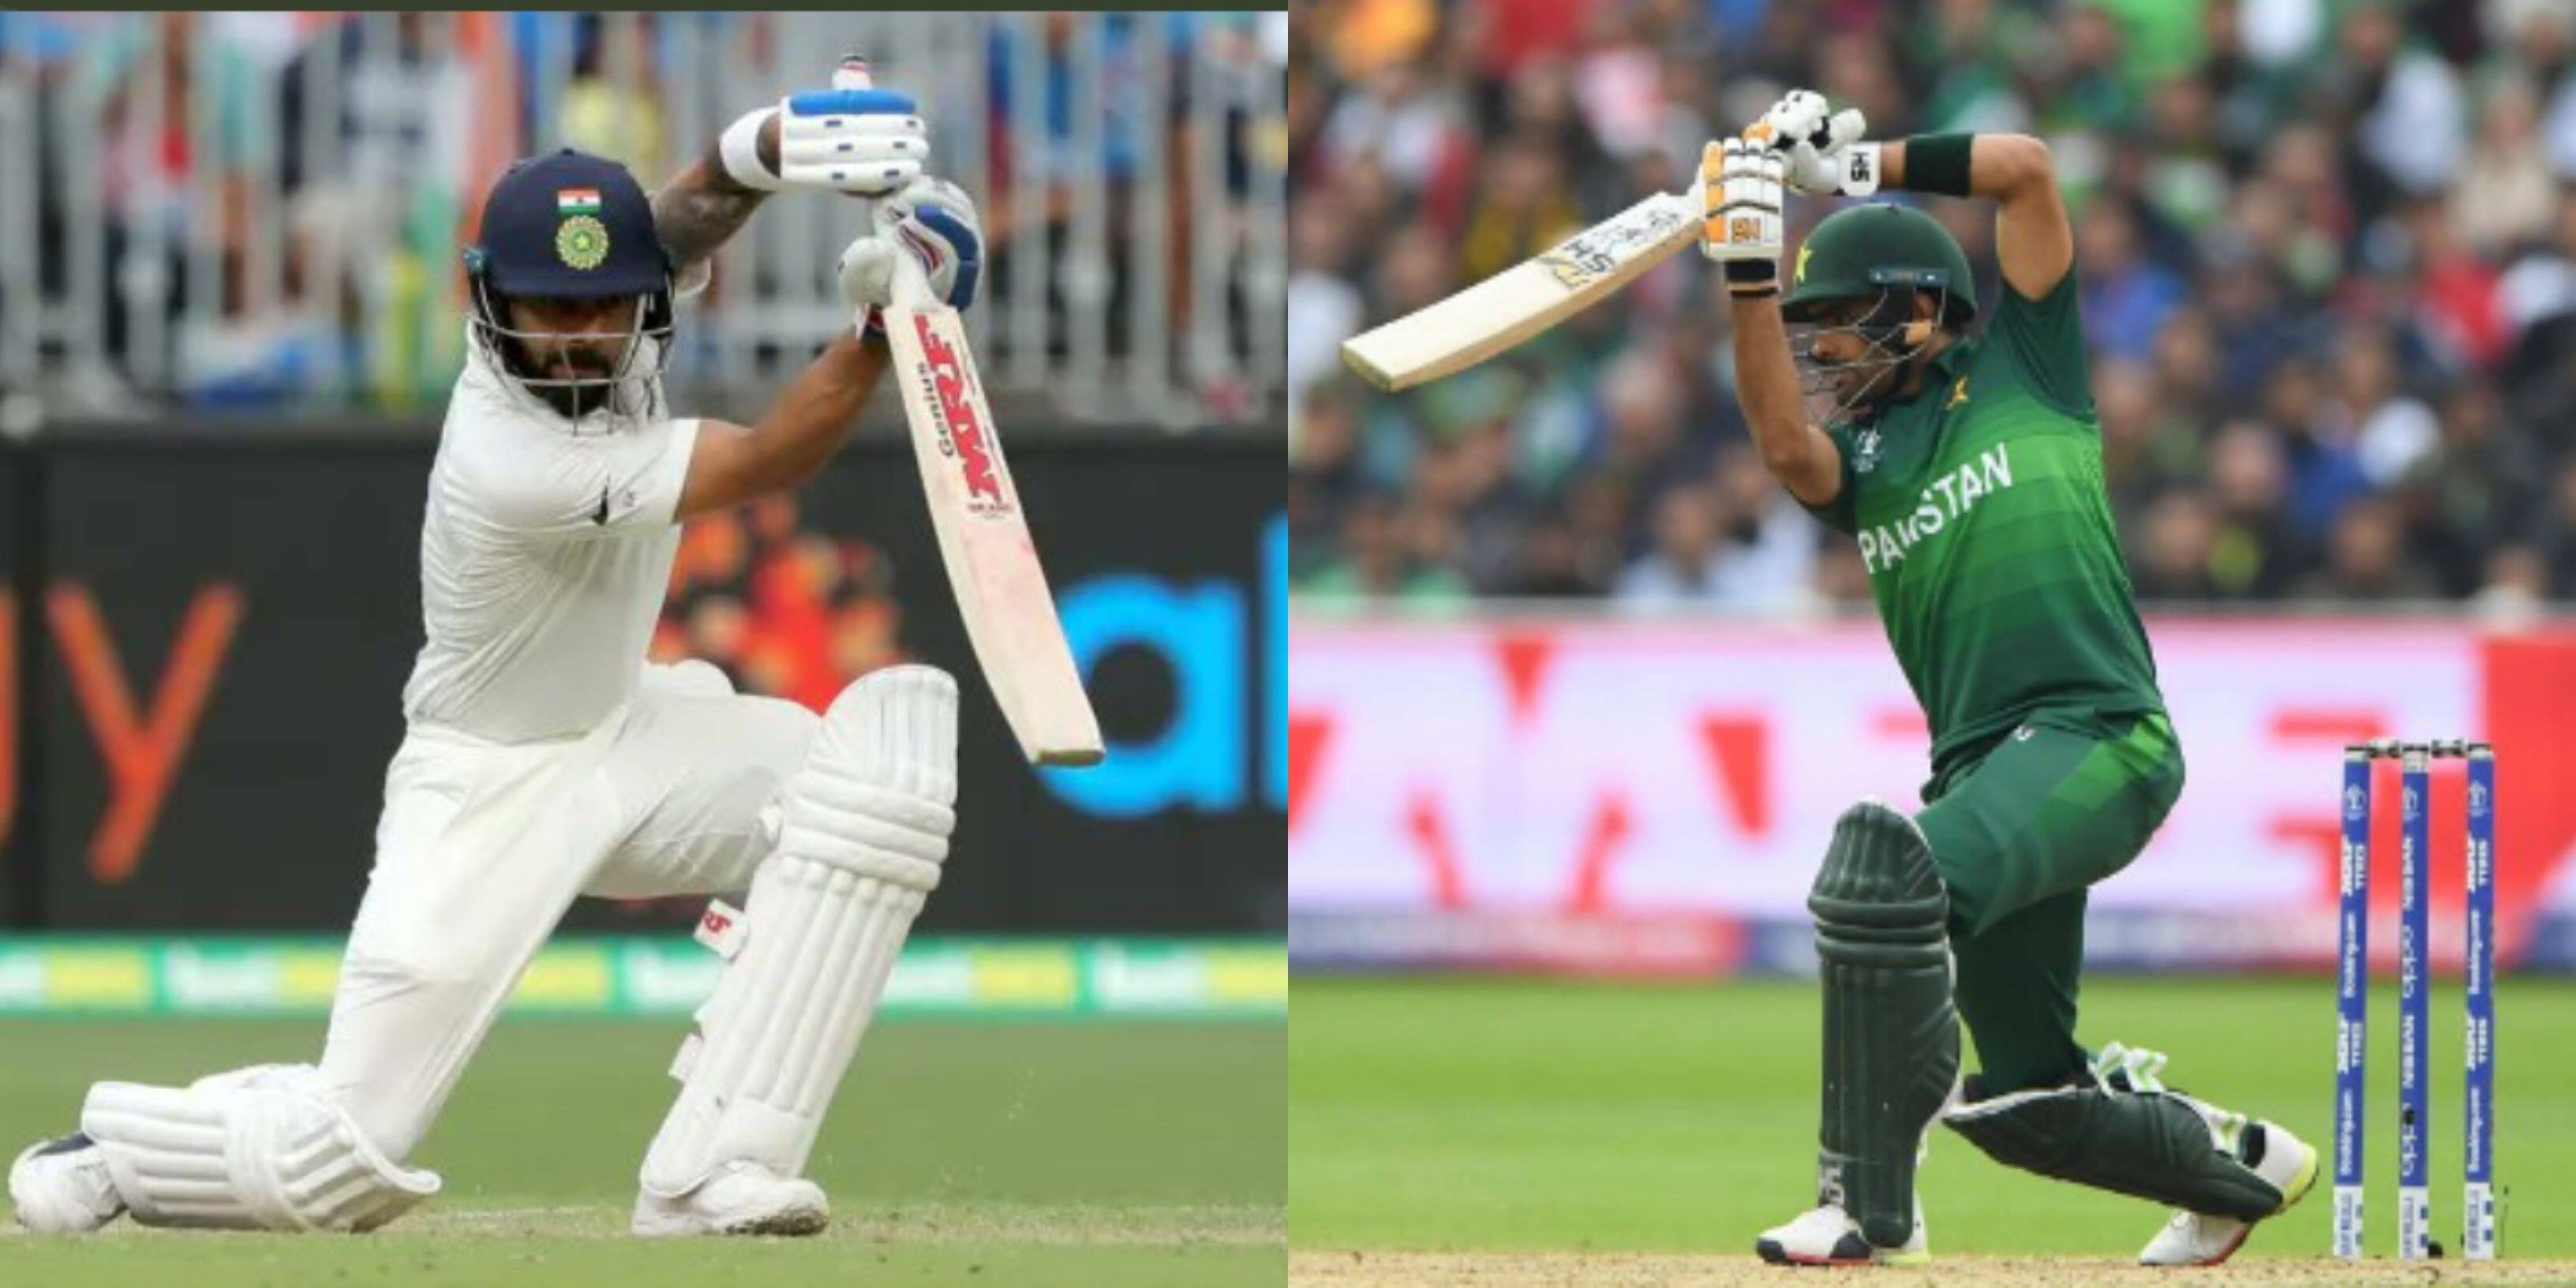 Virat Kohli can improve his technique by looking at Babar Azam: Former Pakistan cricketer